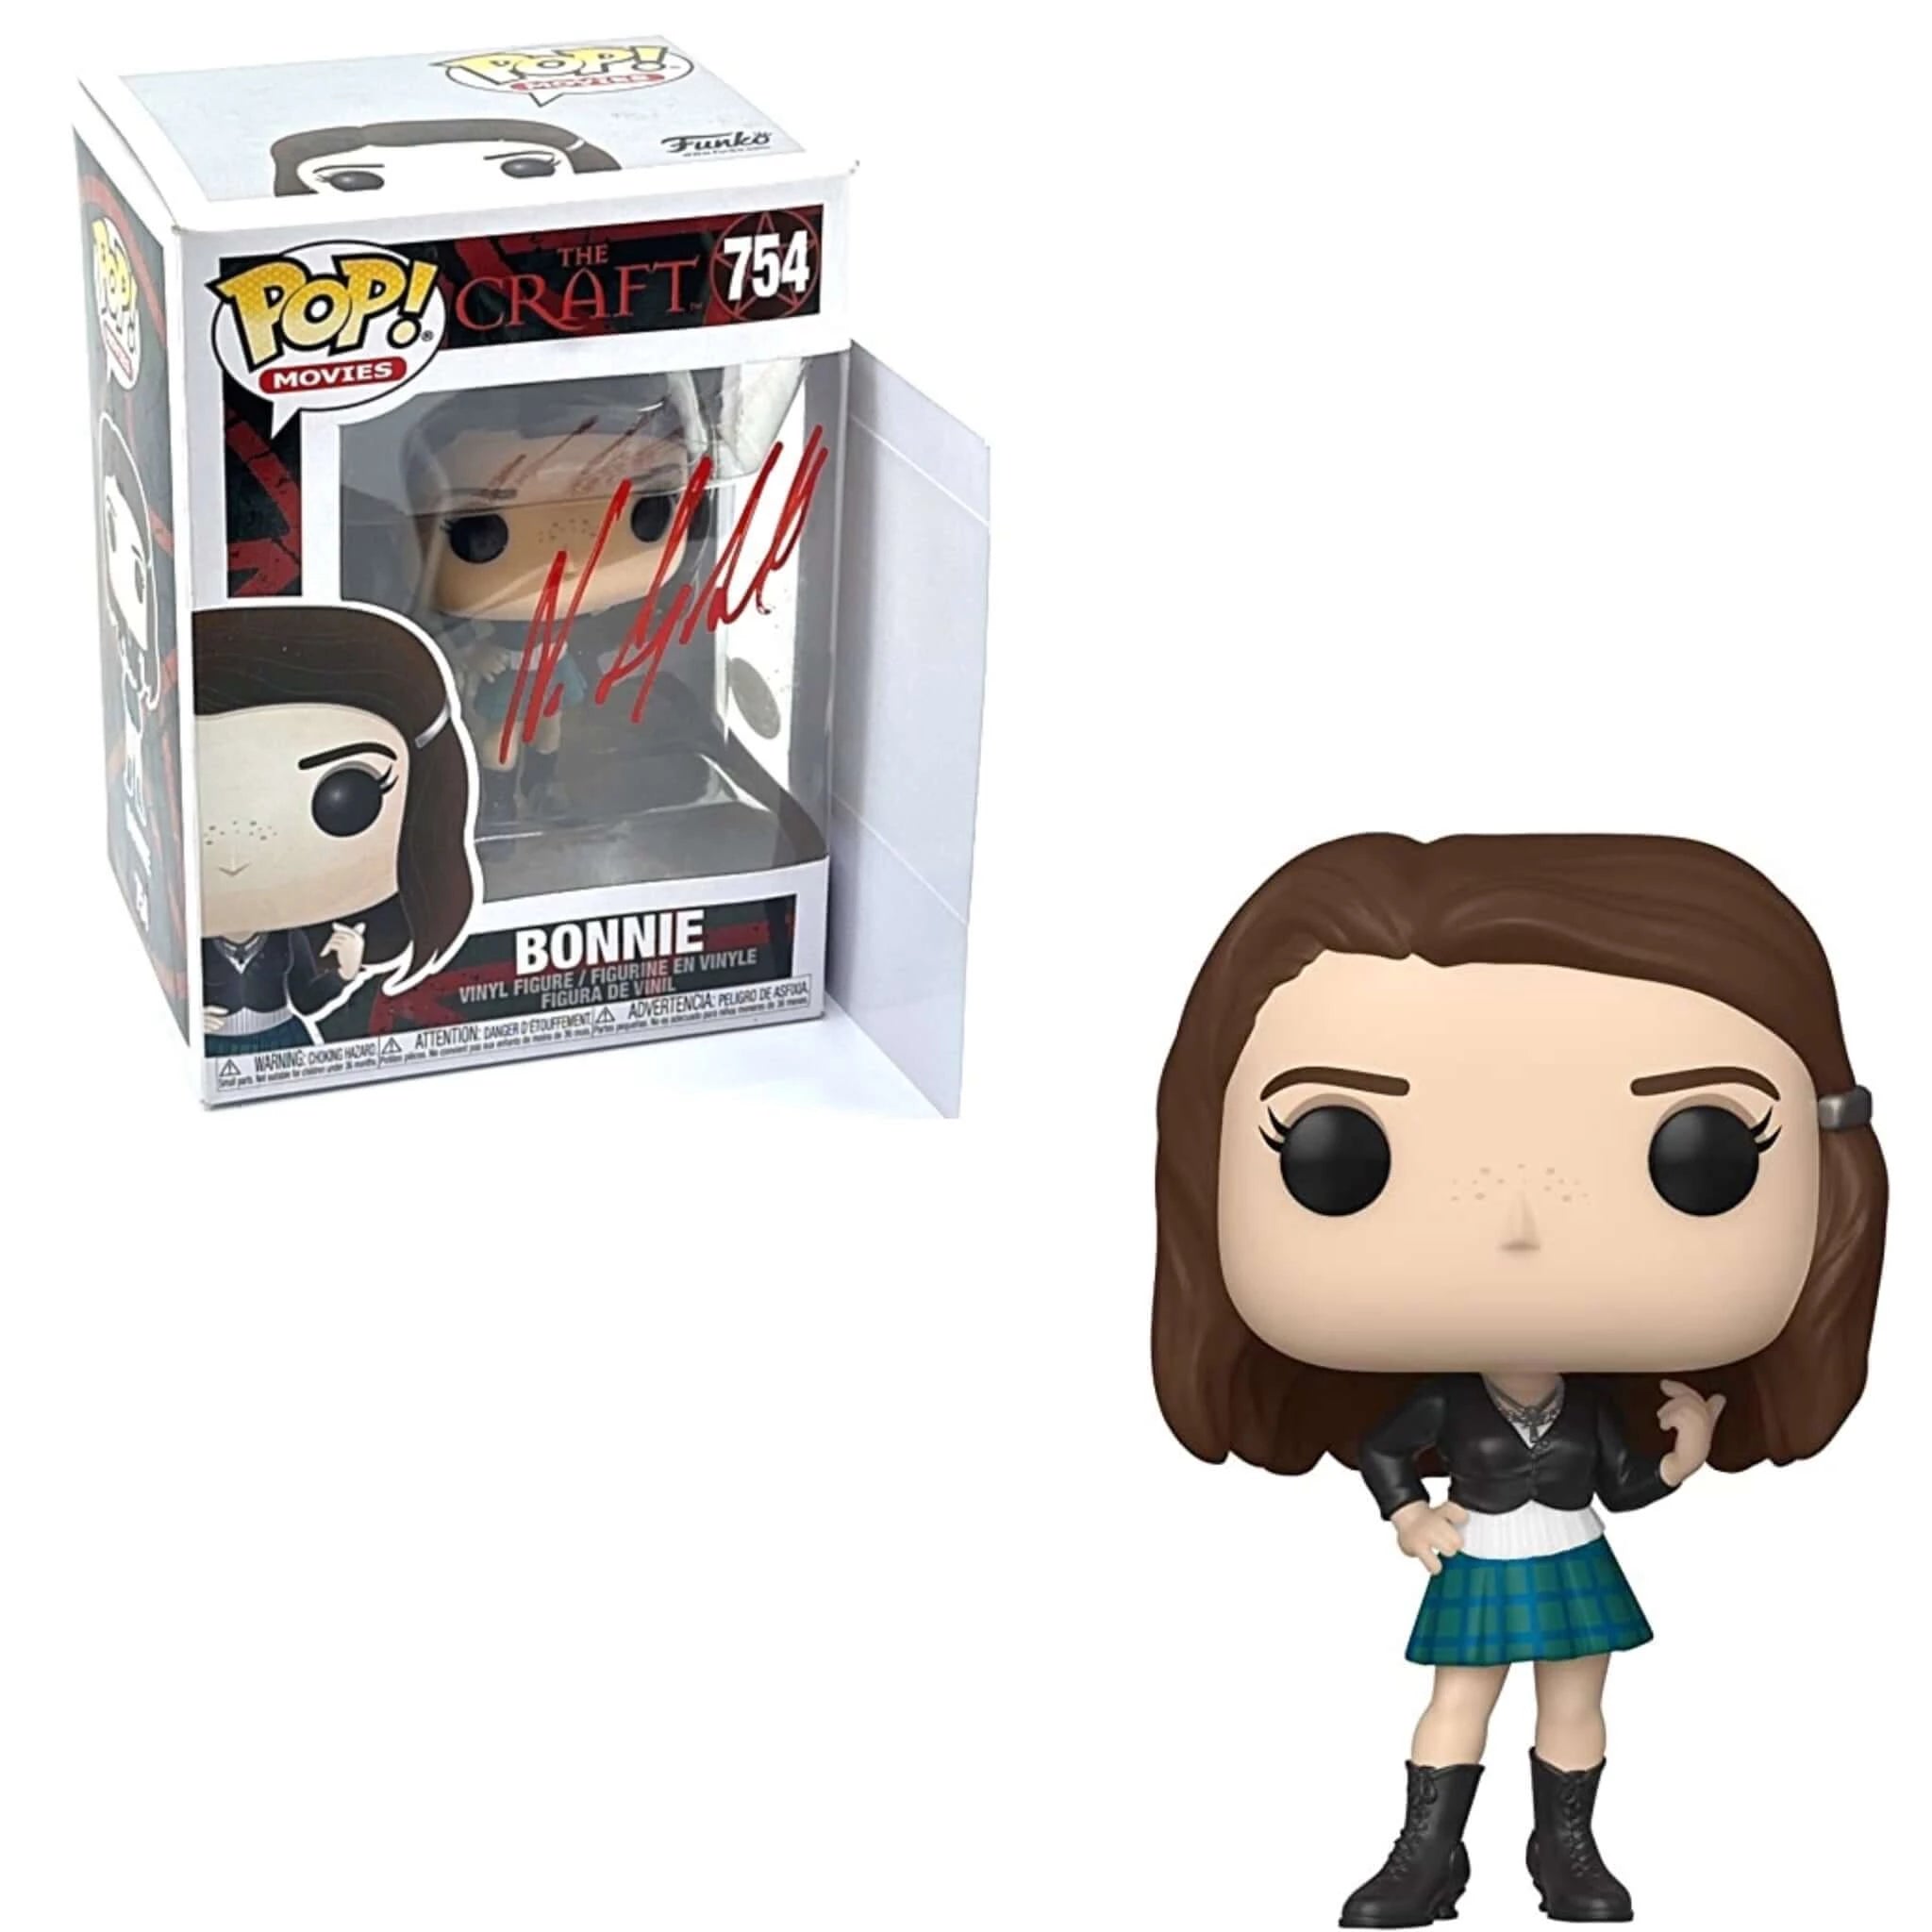 Bonnie Funko Pop! (Signed by Neve Campbell)